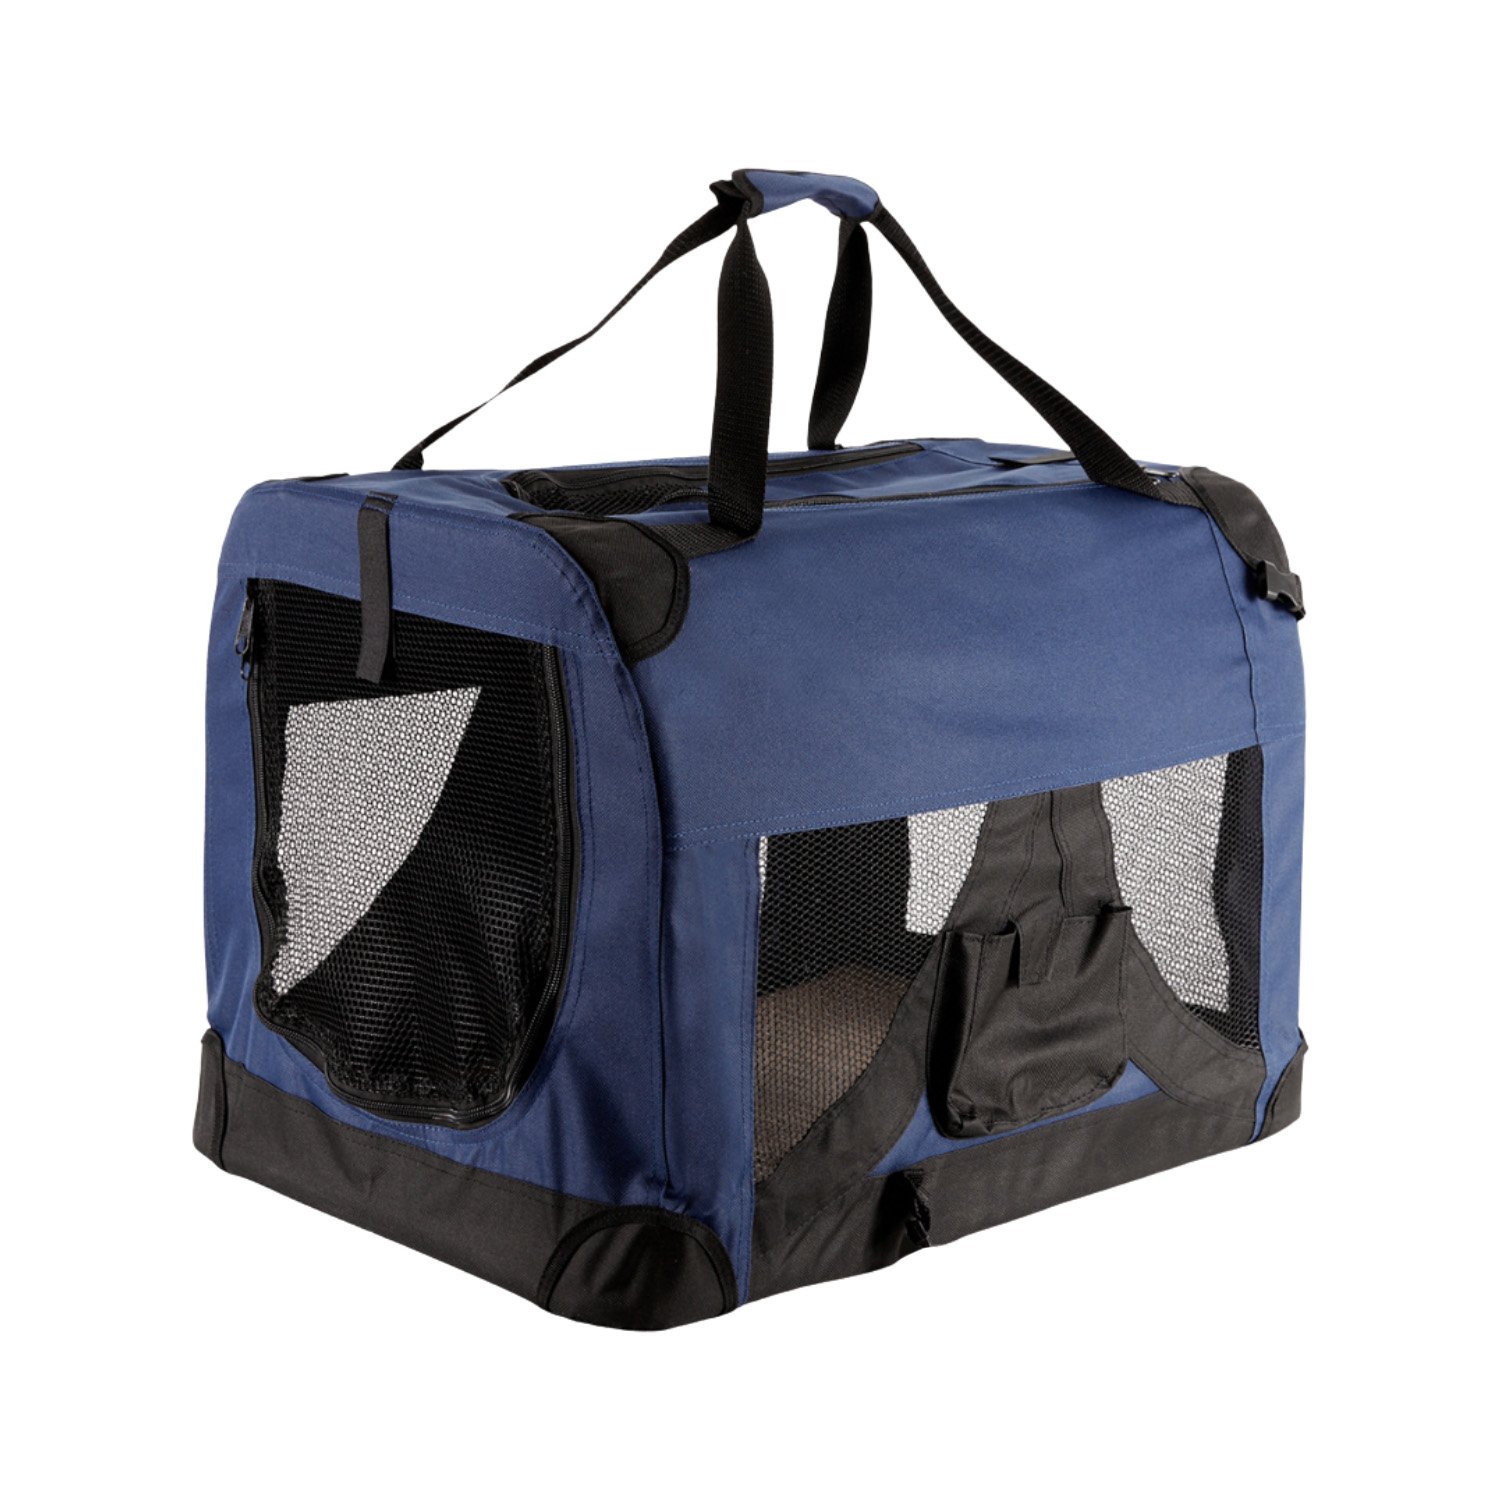 Royale Heavy Duty Soft Collapsible Pet Carrier - Large 2